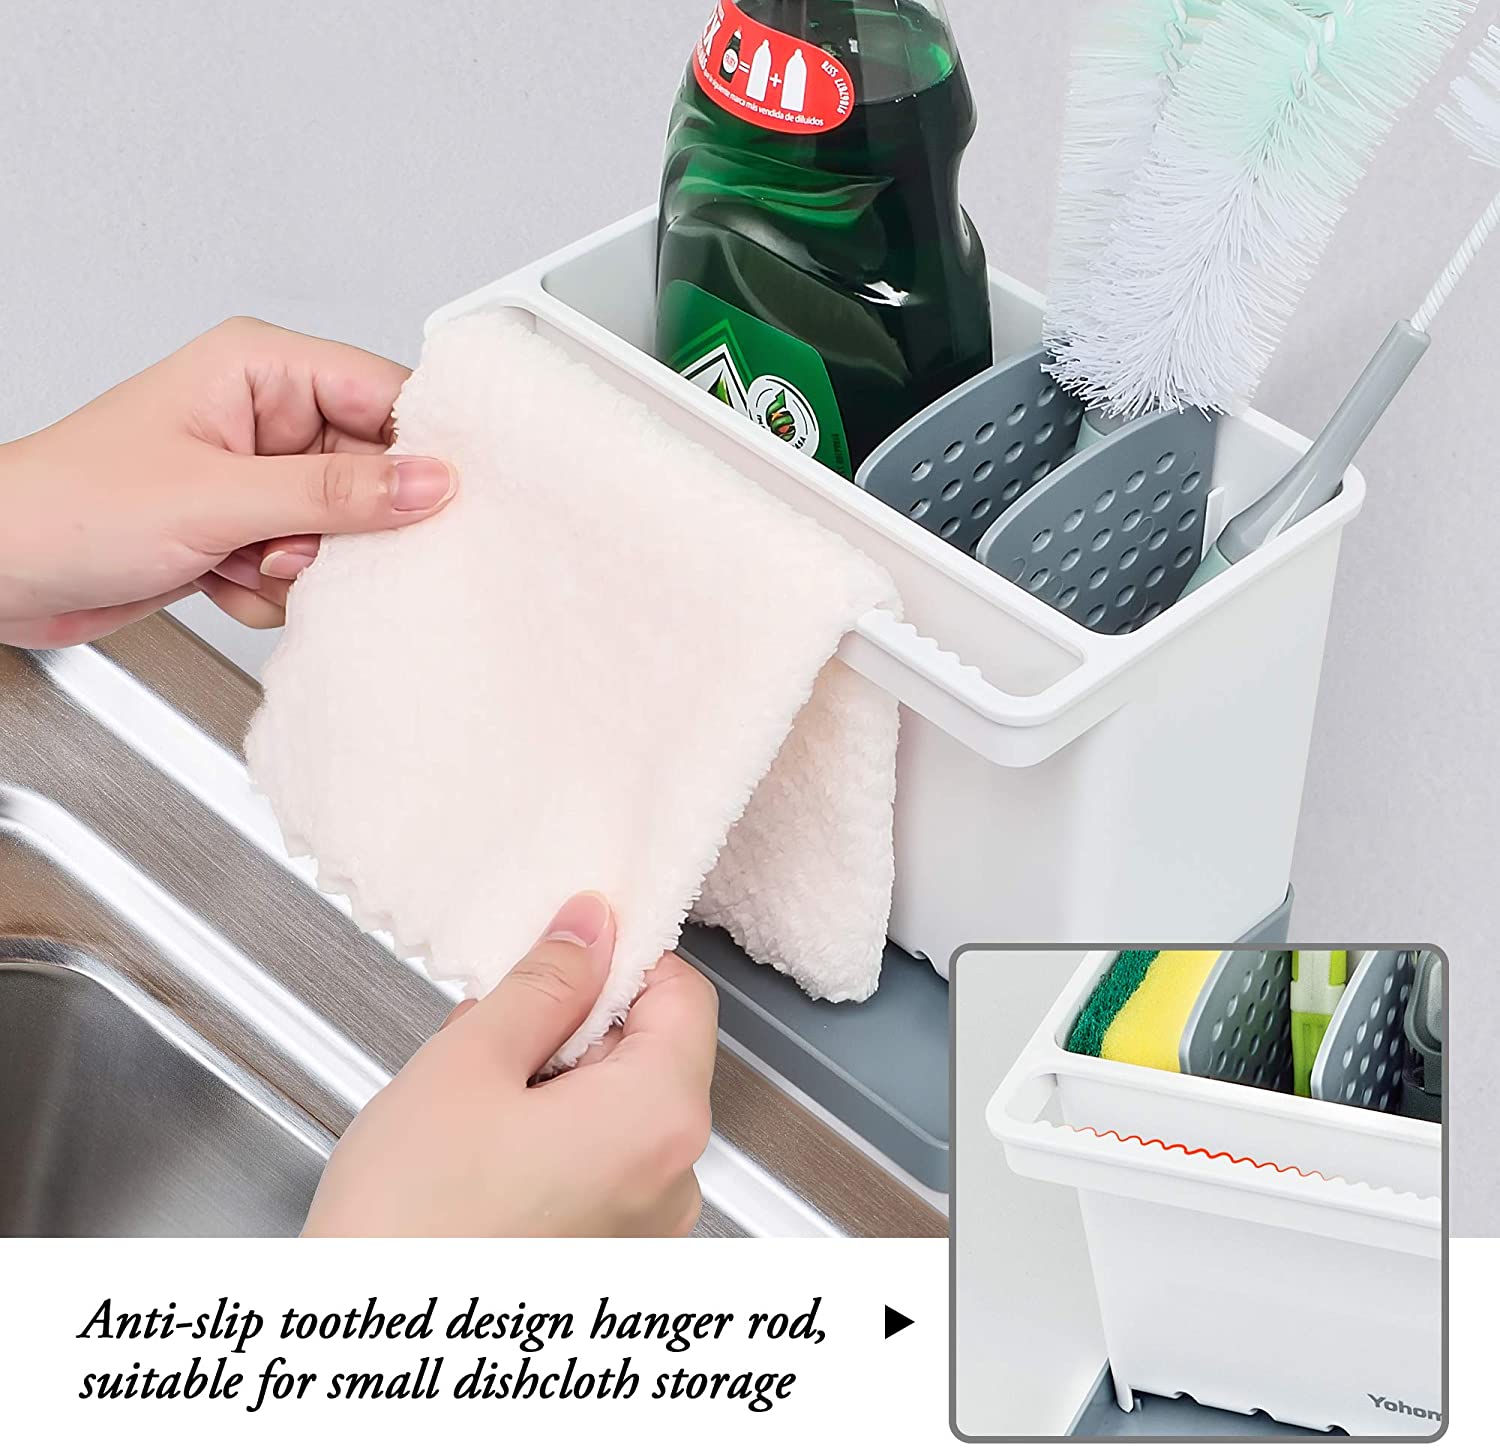 for Kitchen with Holder for Sponges and Cleaning Supplies 3-in-1 Multifunctional sponge caddy and Dish Cloth Hanger Bathroom Soap Box Organizer with Suction Cups Sponge Holder for Kitchen Sink